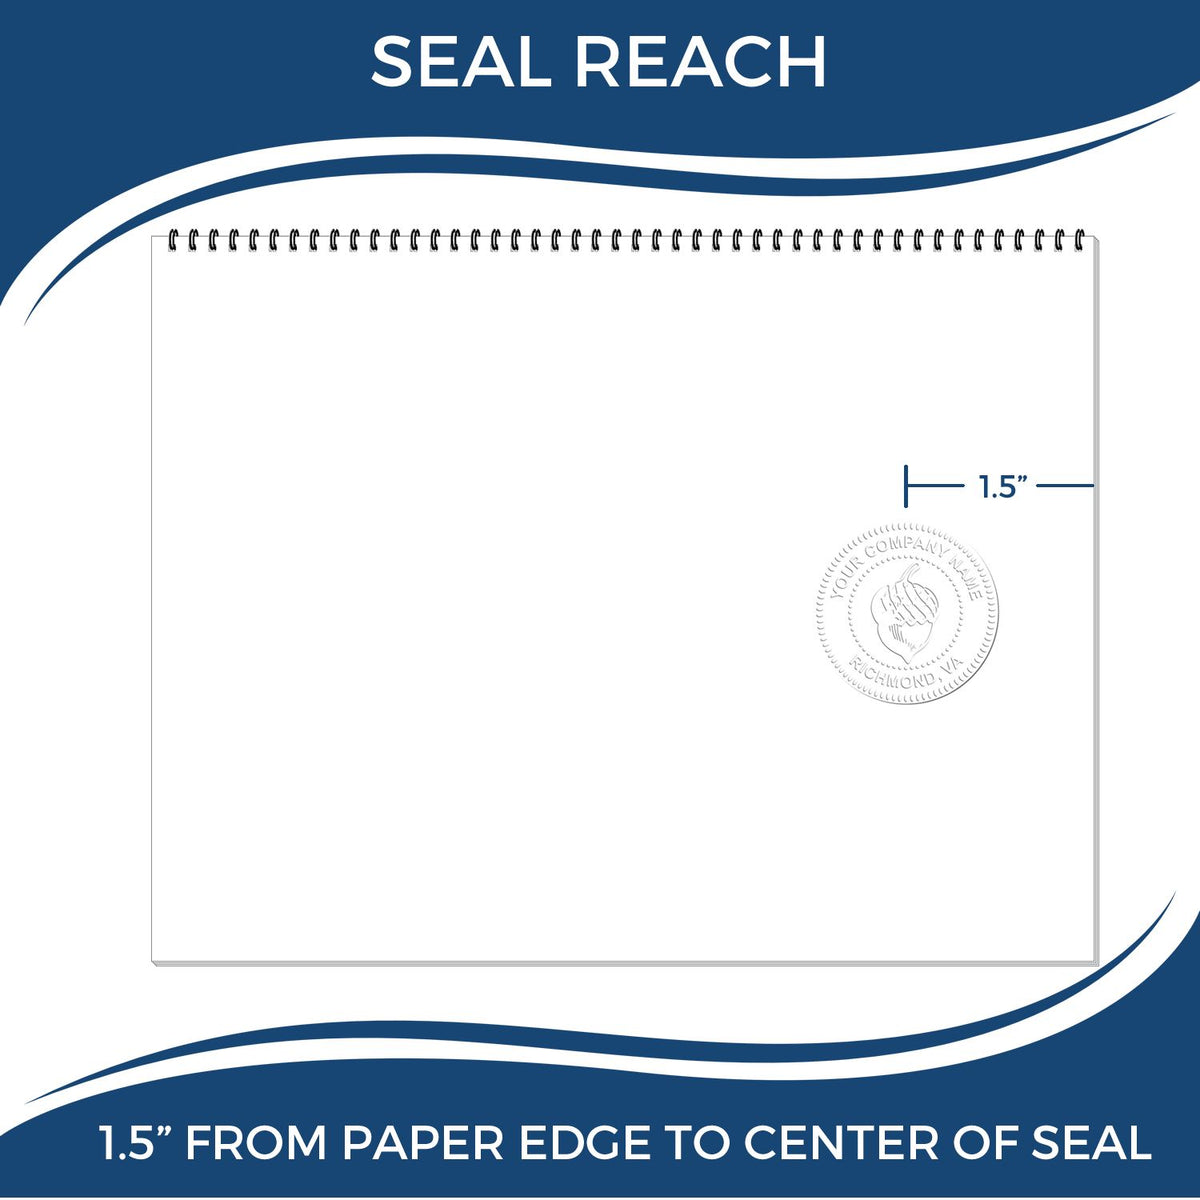 An infographic showing the seal reach which is represented by a ruler and a miniature seal image of the Soft Delaware Professional Engineer Seal